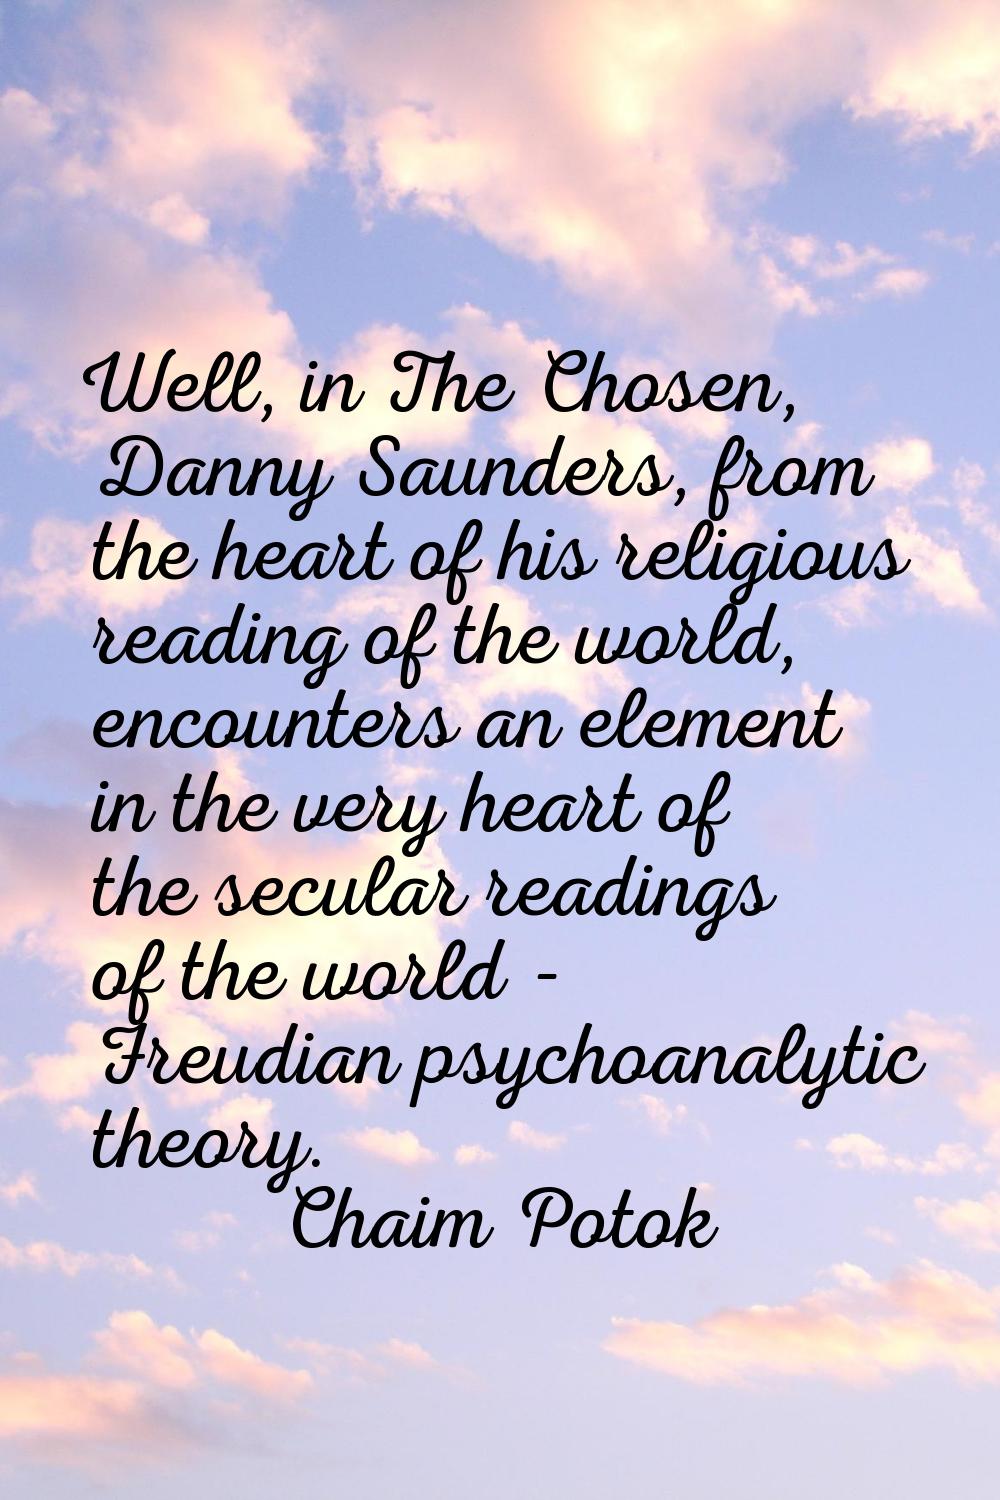 Well, in The Chosen, Danny Saunders, from the heart of his religious reading of the world, encounte